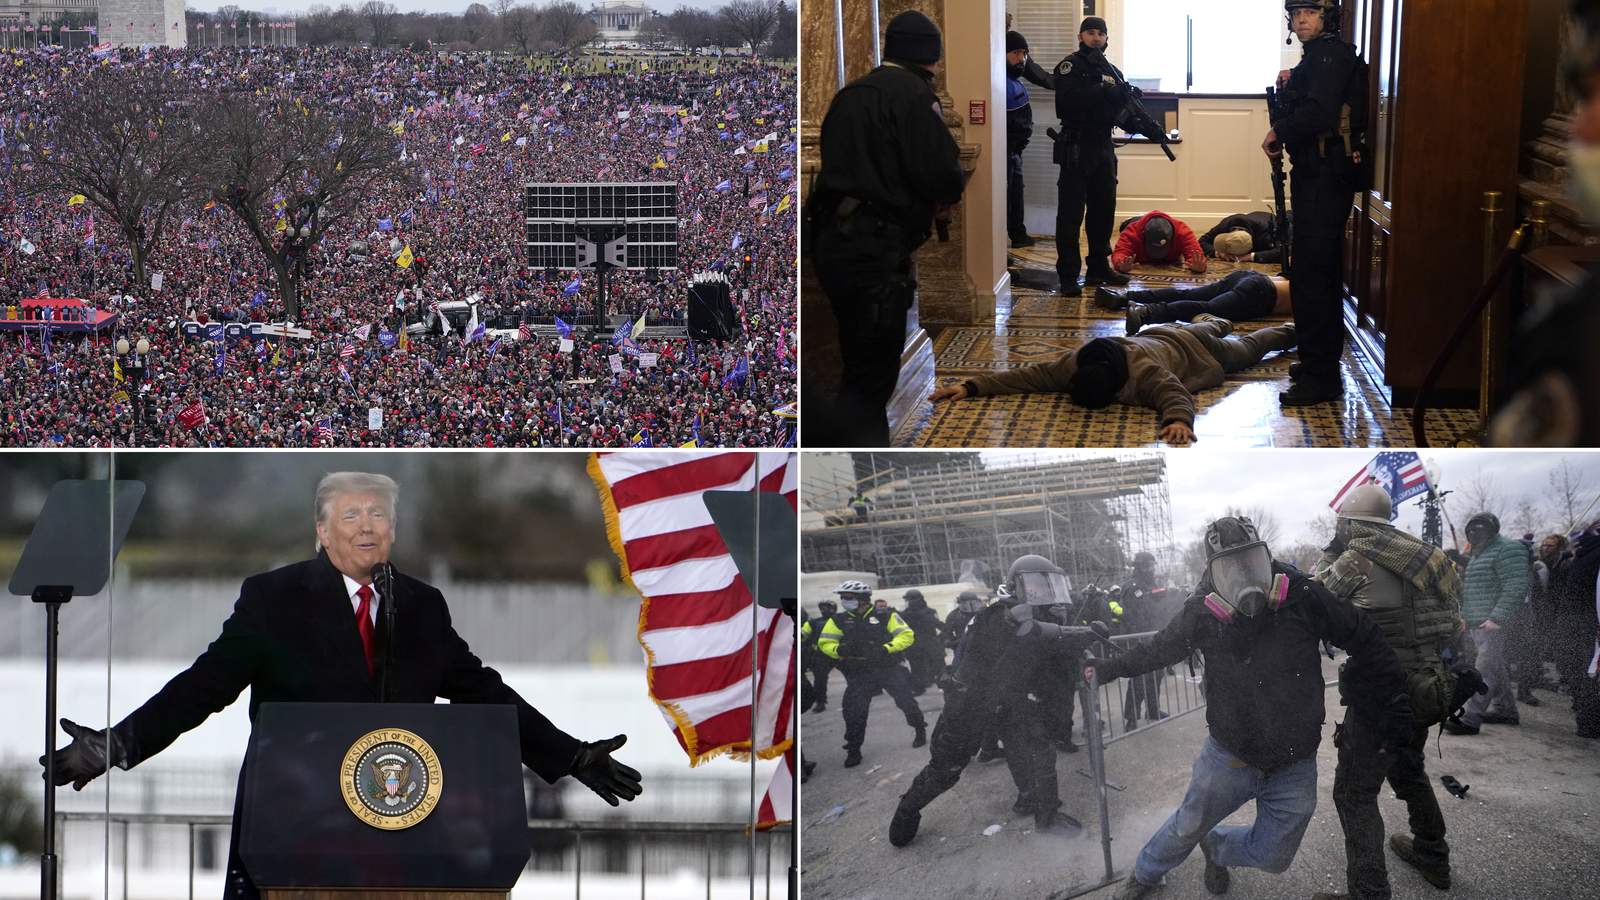 Photos show evolution of Trump rally from protest to violence, chaos outside US Capitol